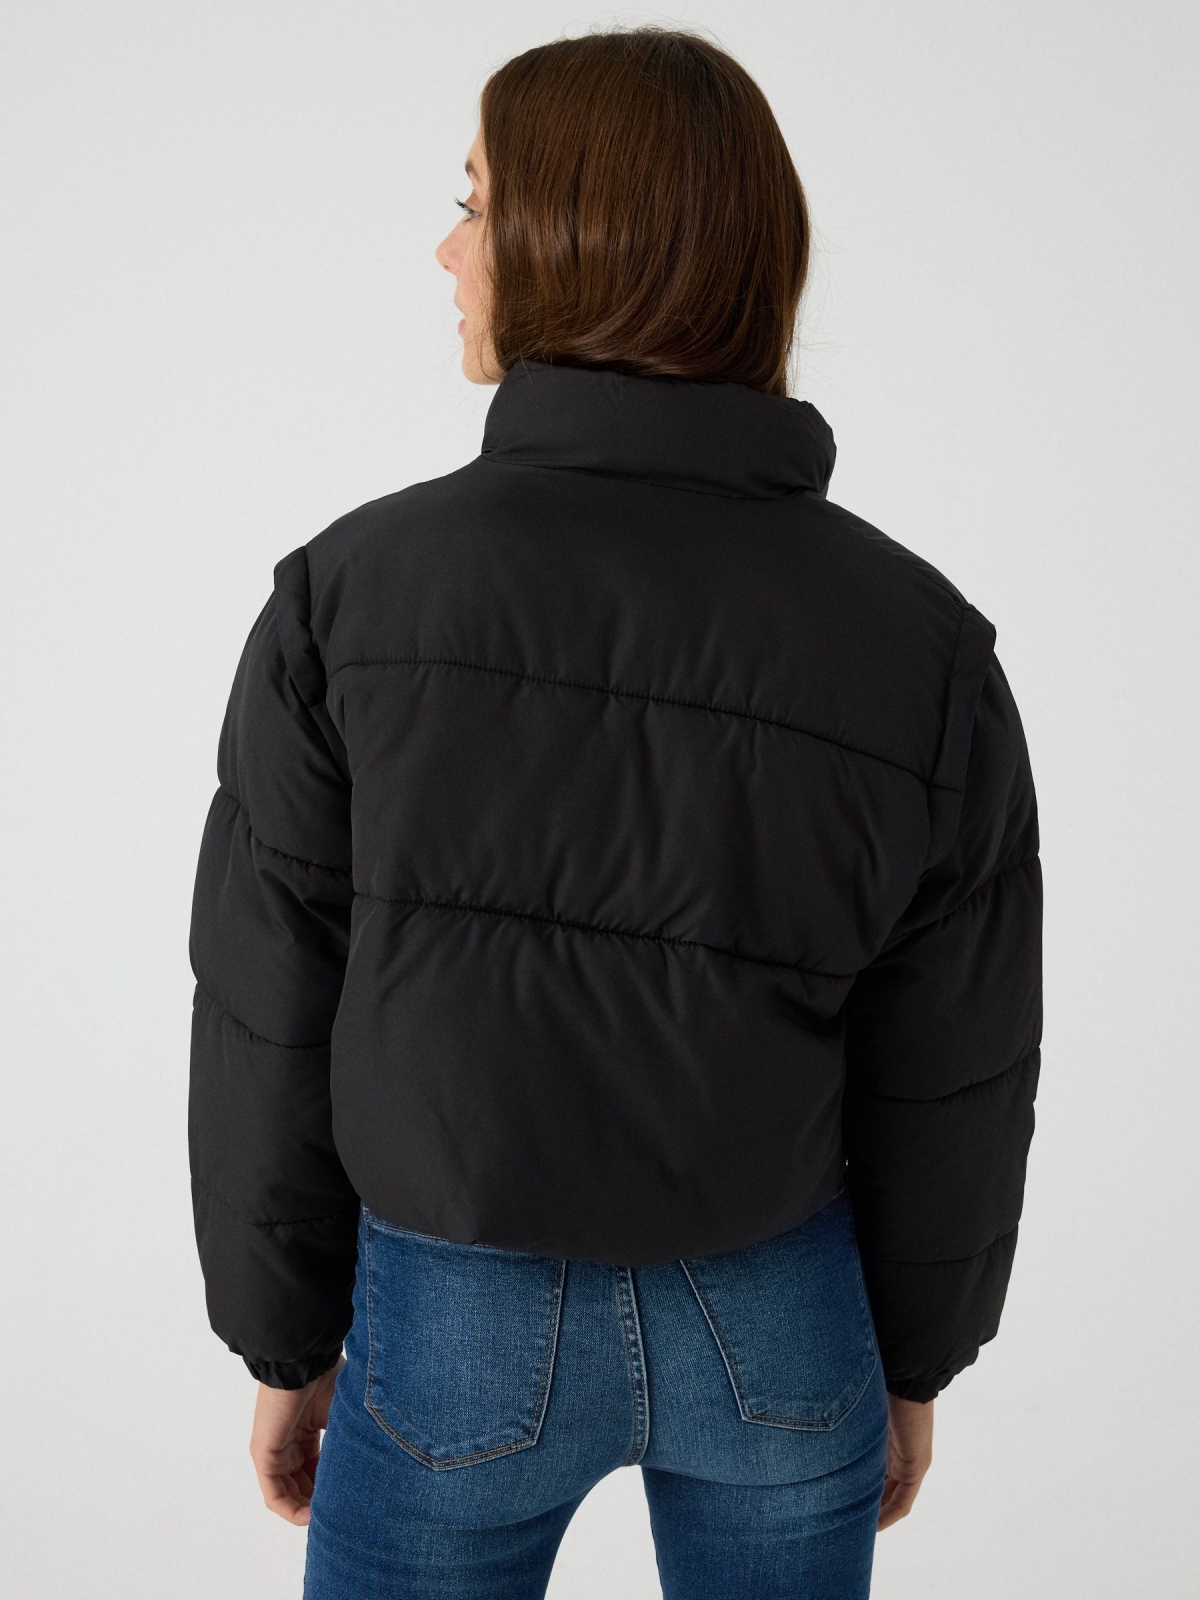 Padded cropped jacket black middle back view